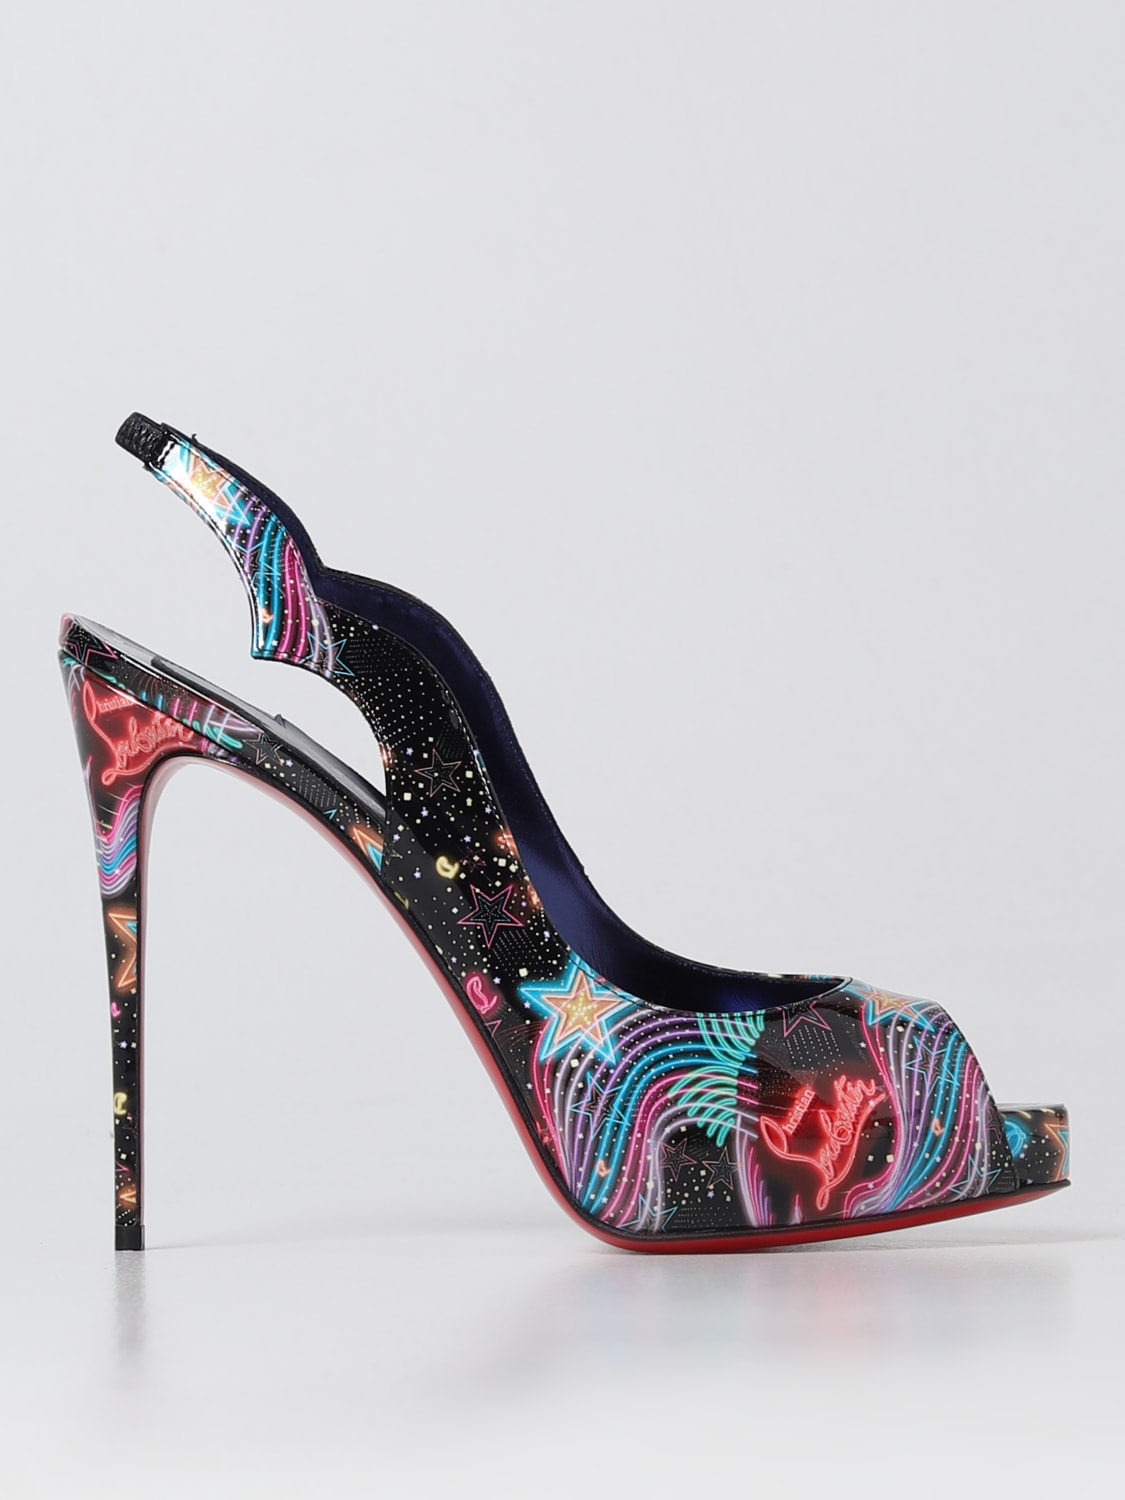 Van Army kalorie CHRISTIAN LOUBOUTIN: Hot Chick pumps in patent leather - Black | Christian  Louboutin high heel shoes 1230231 online at GIGLIO.COM